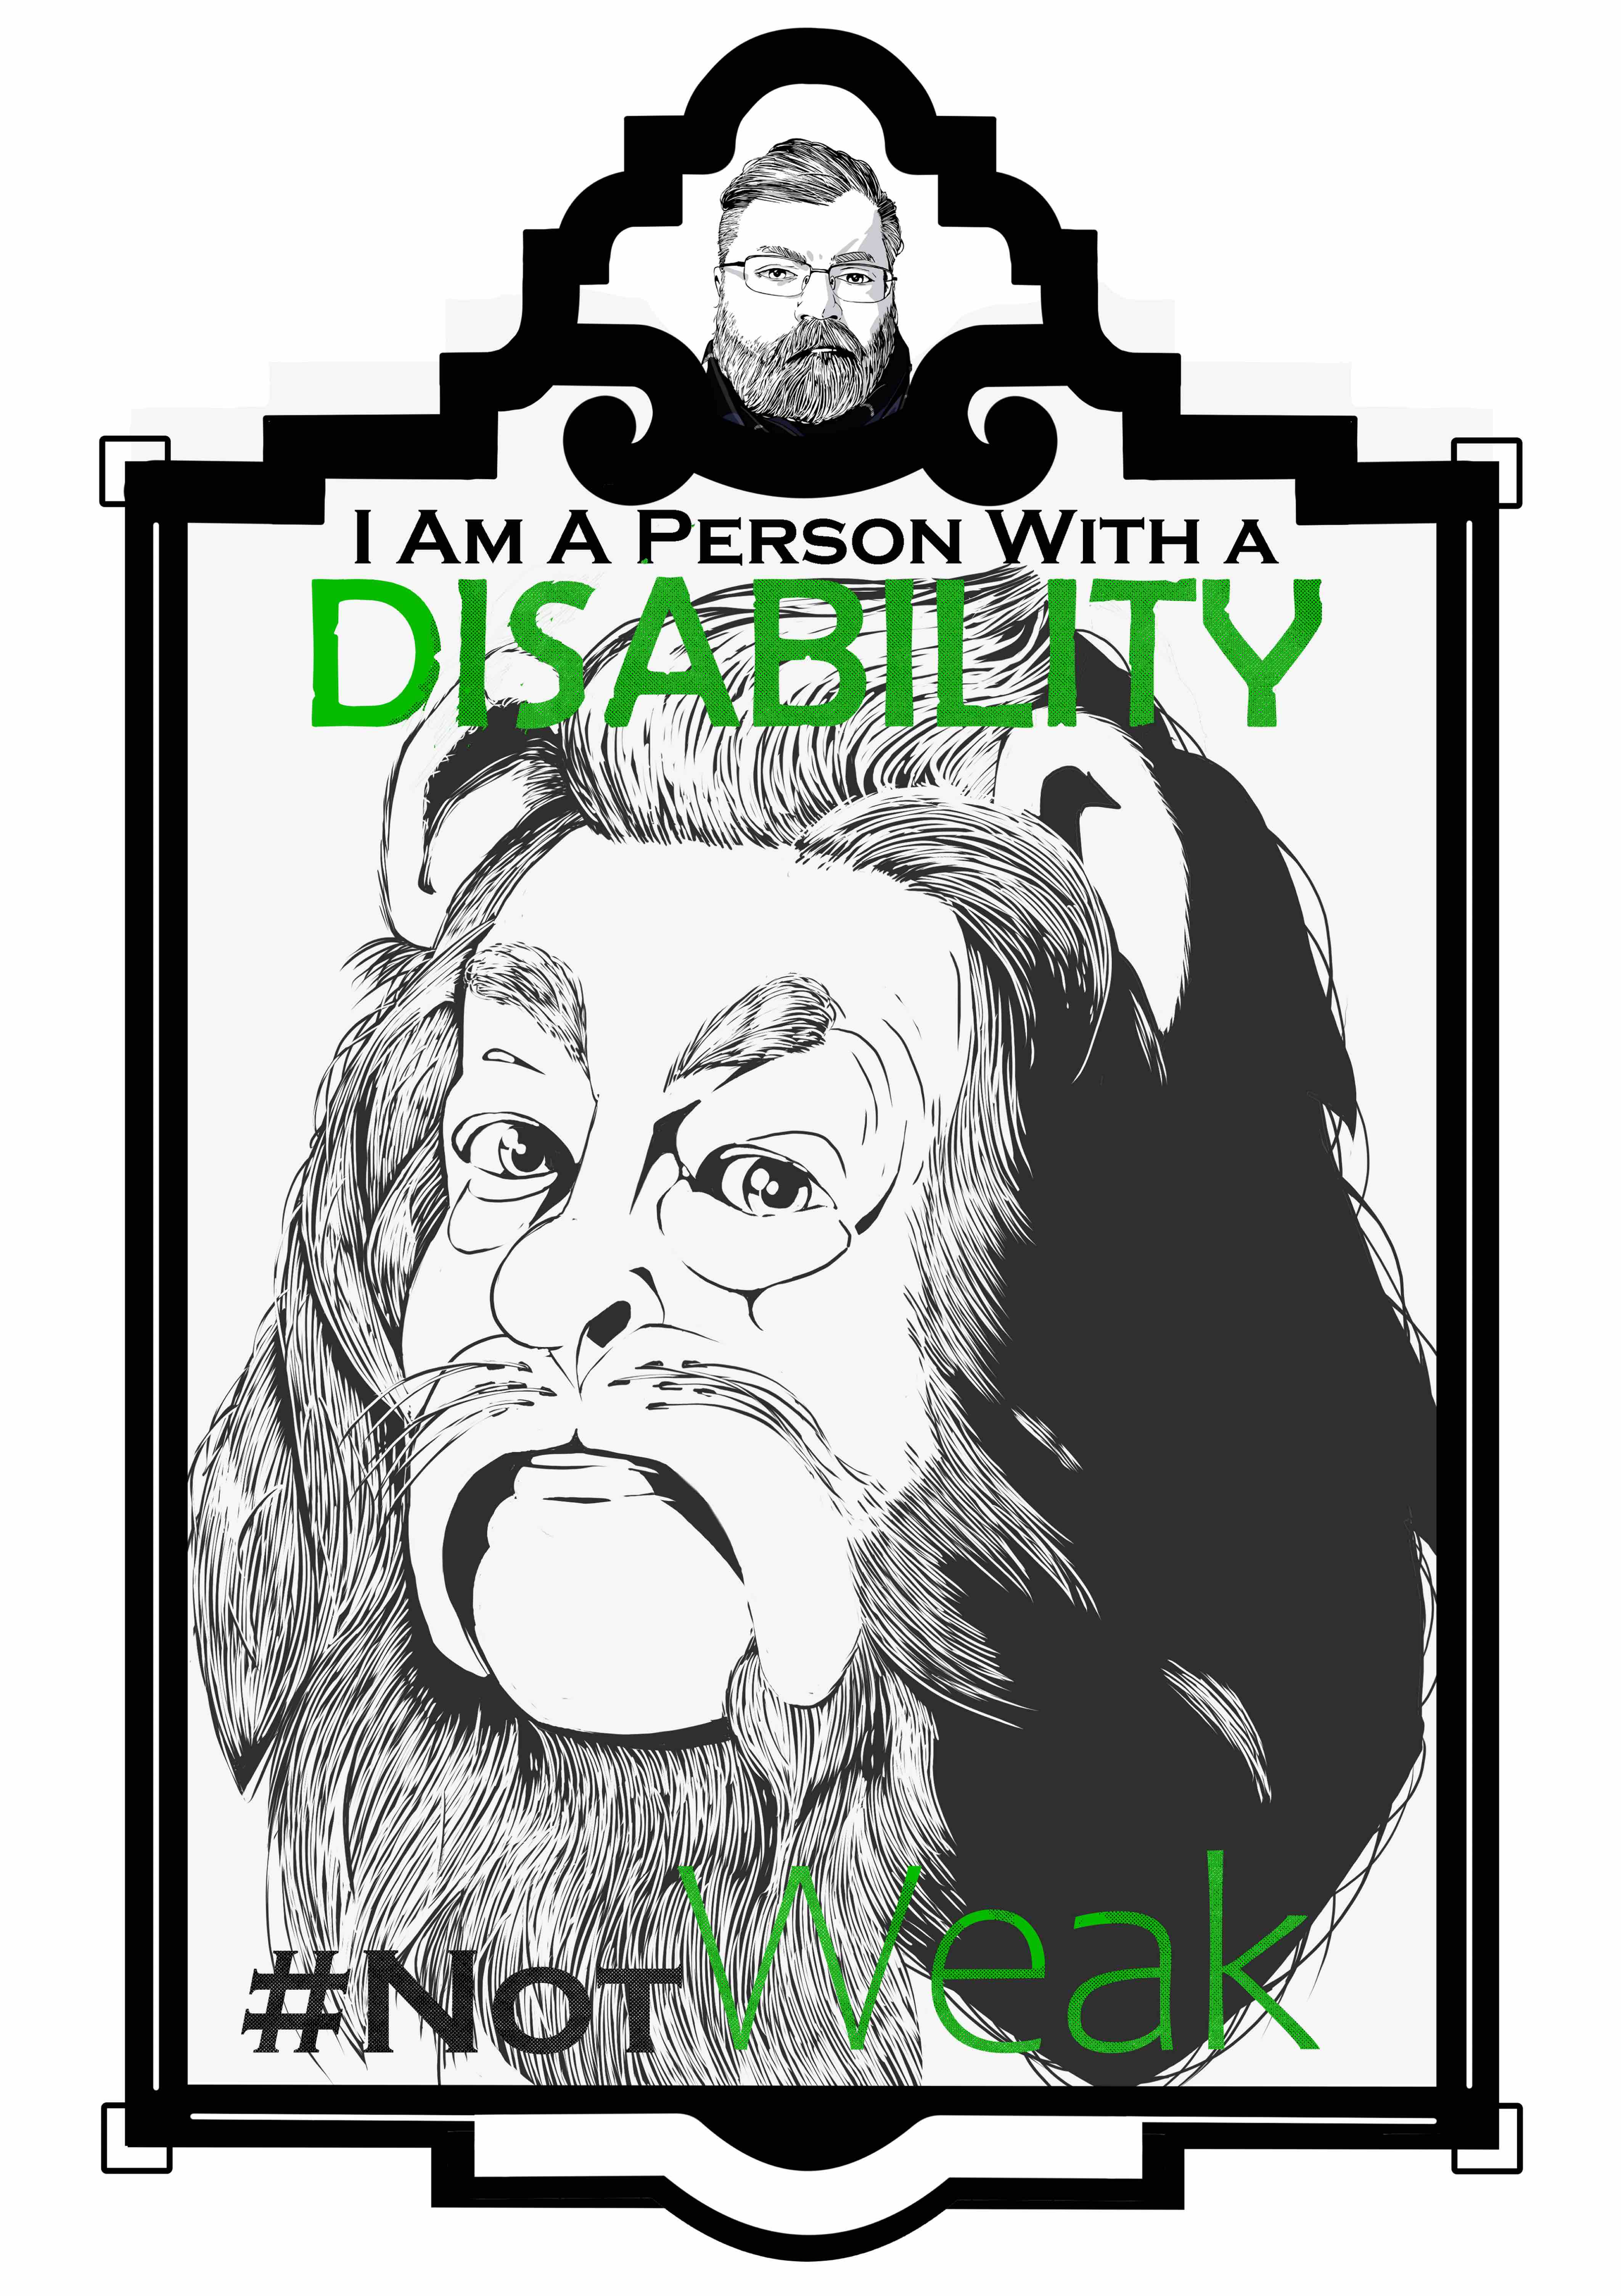 An illustration of The Cowardly Lion from the Wizard of Oz from the neck up in an art deco frame. The frame consists of a small marquee at the top with an image of the artist and the main image below. The text “I am a person with a disability.’ Sits at the top of the illustration. The word “Disability” is in all caps and is colored lime green. The text “# Not Weak” is at the bottom of the illustration. The Lion has fur surrounding its face with a large bulbus nose and large cheeks. Cat whiskers grow from its upper lip.